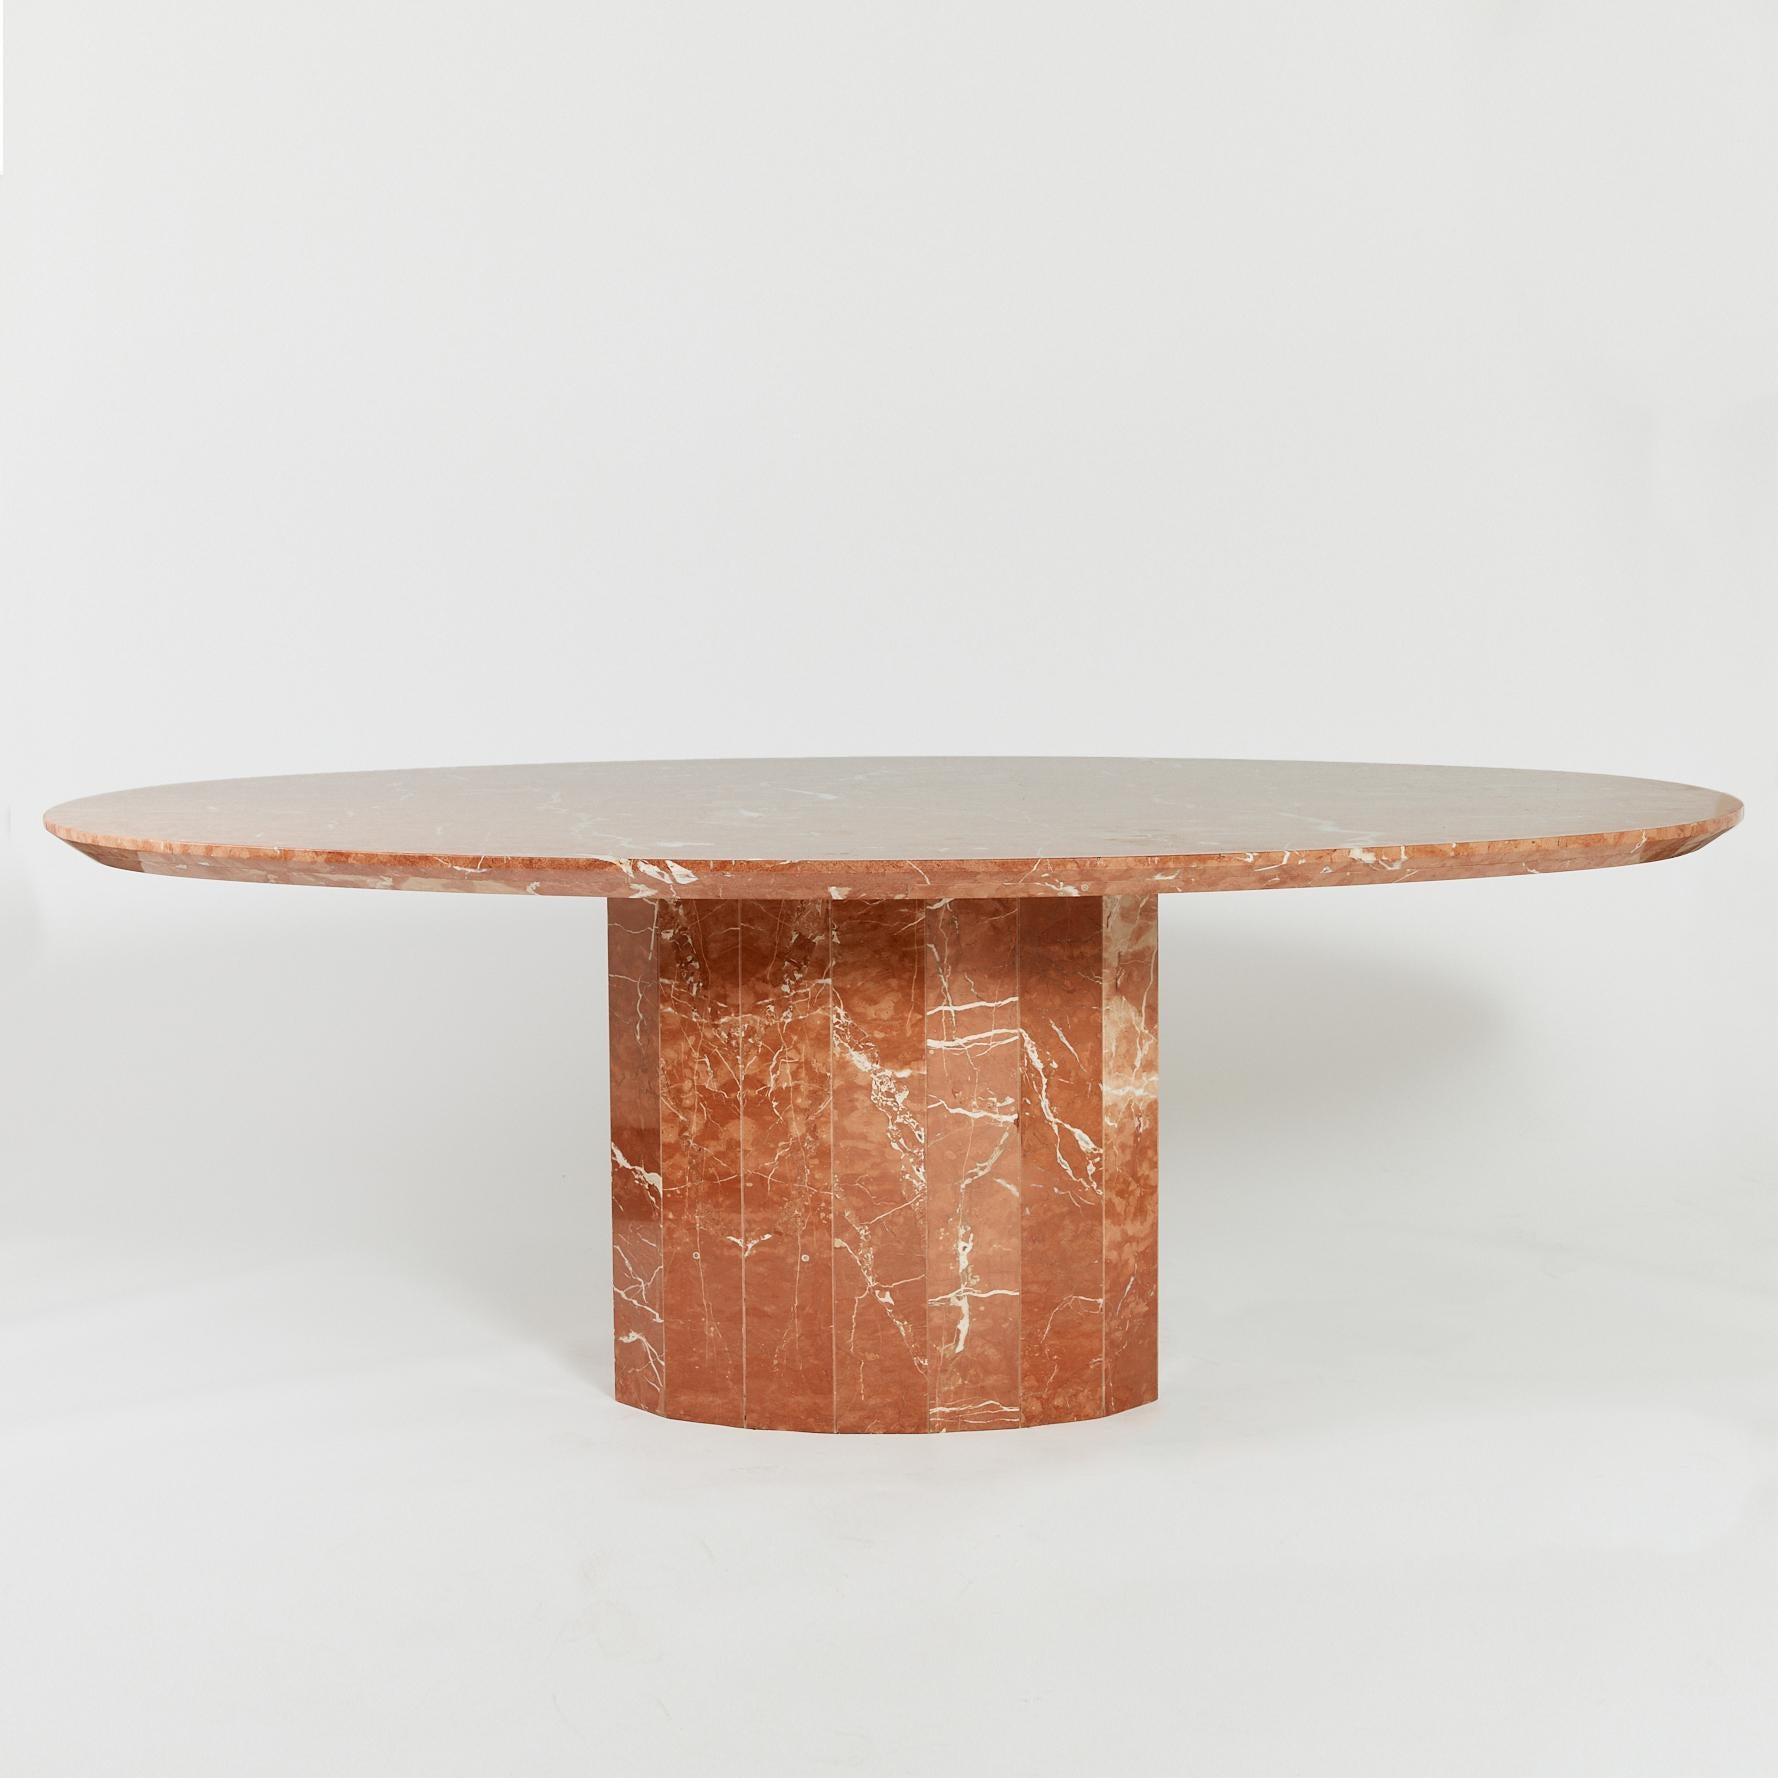 Iconic marble 6-8 seater dining table with faceted pedestal base and vivid veining on large oval top.

Featuring an extremely thick table top, this rare statement piece is made from Rojo Coralito marble and has a polished finish.

Origin: